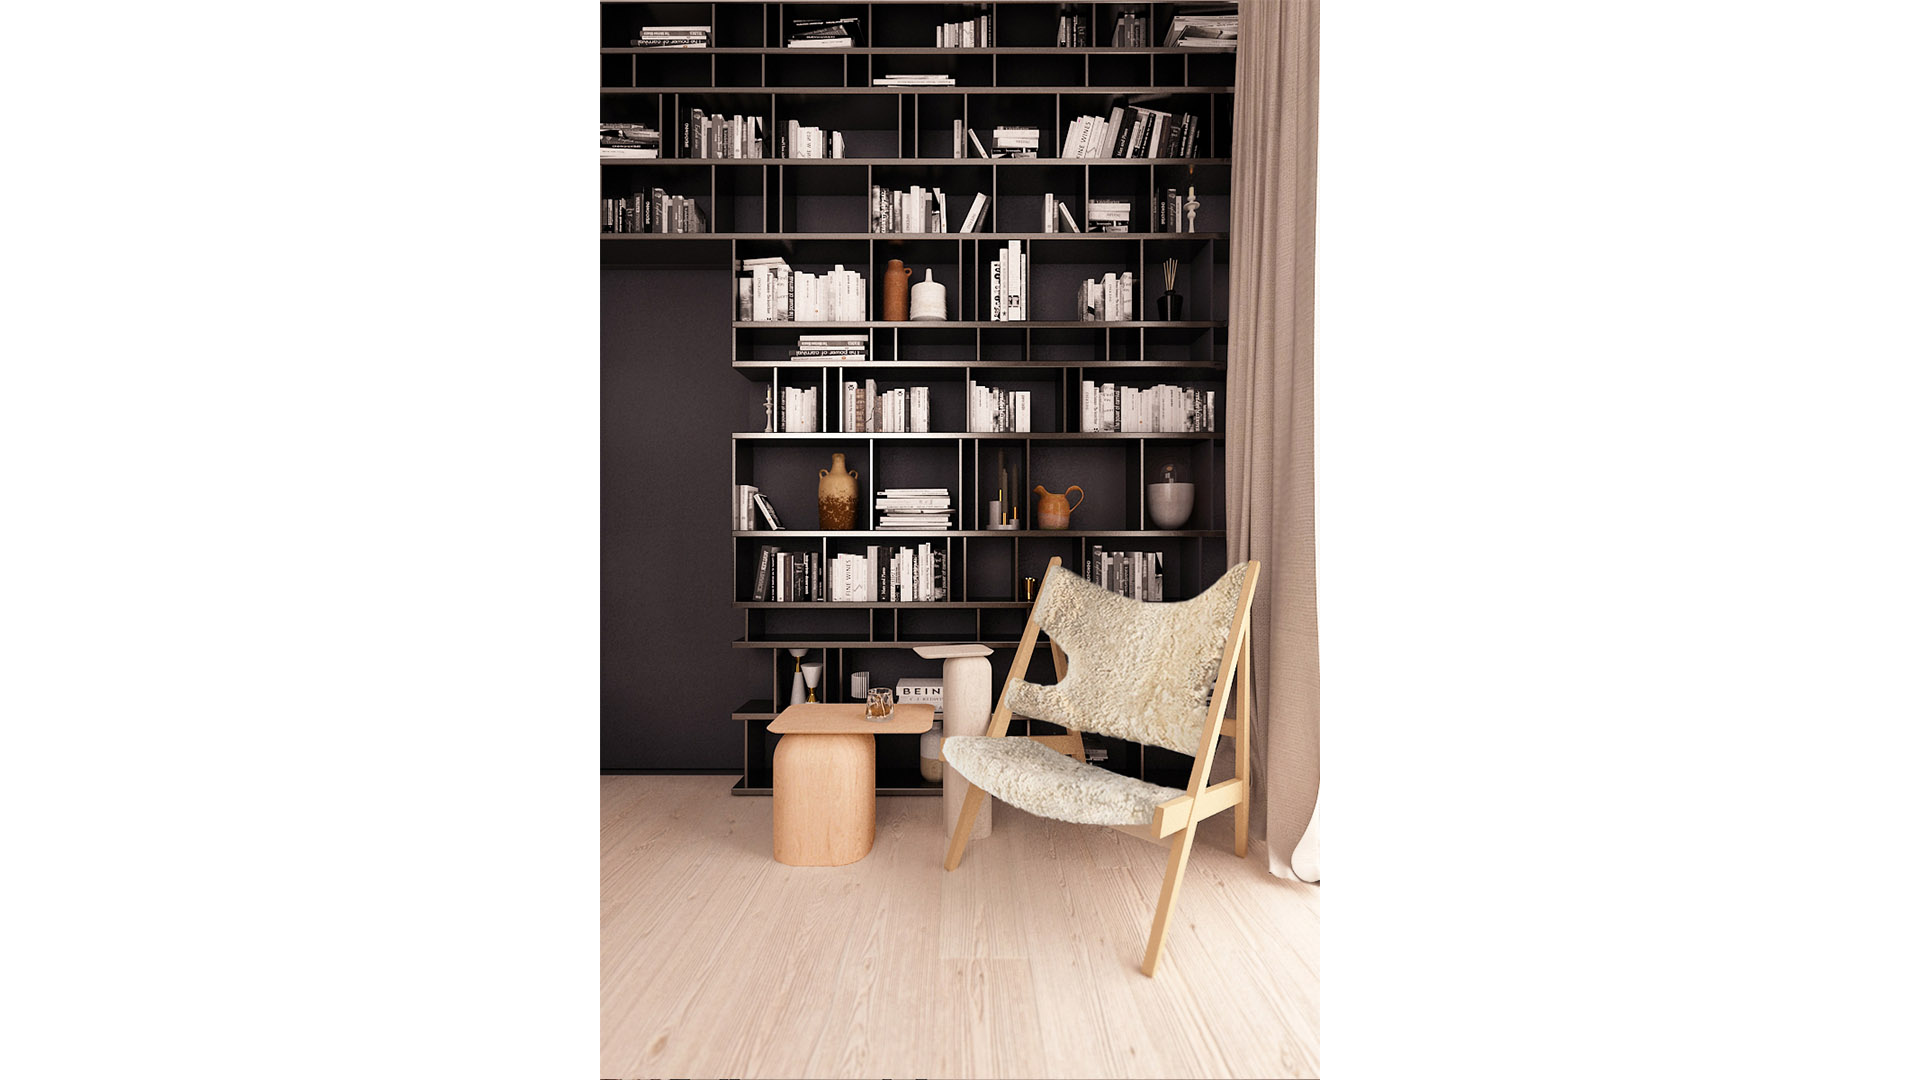 A modern home library in black metal, with a lambskin knitting chair from Menu and Nikari April tables.